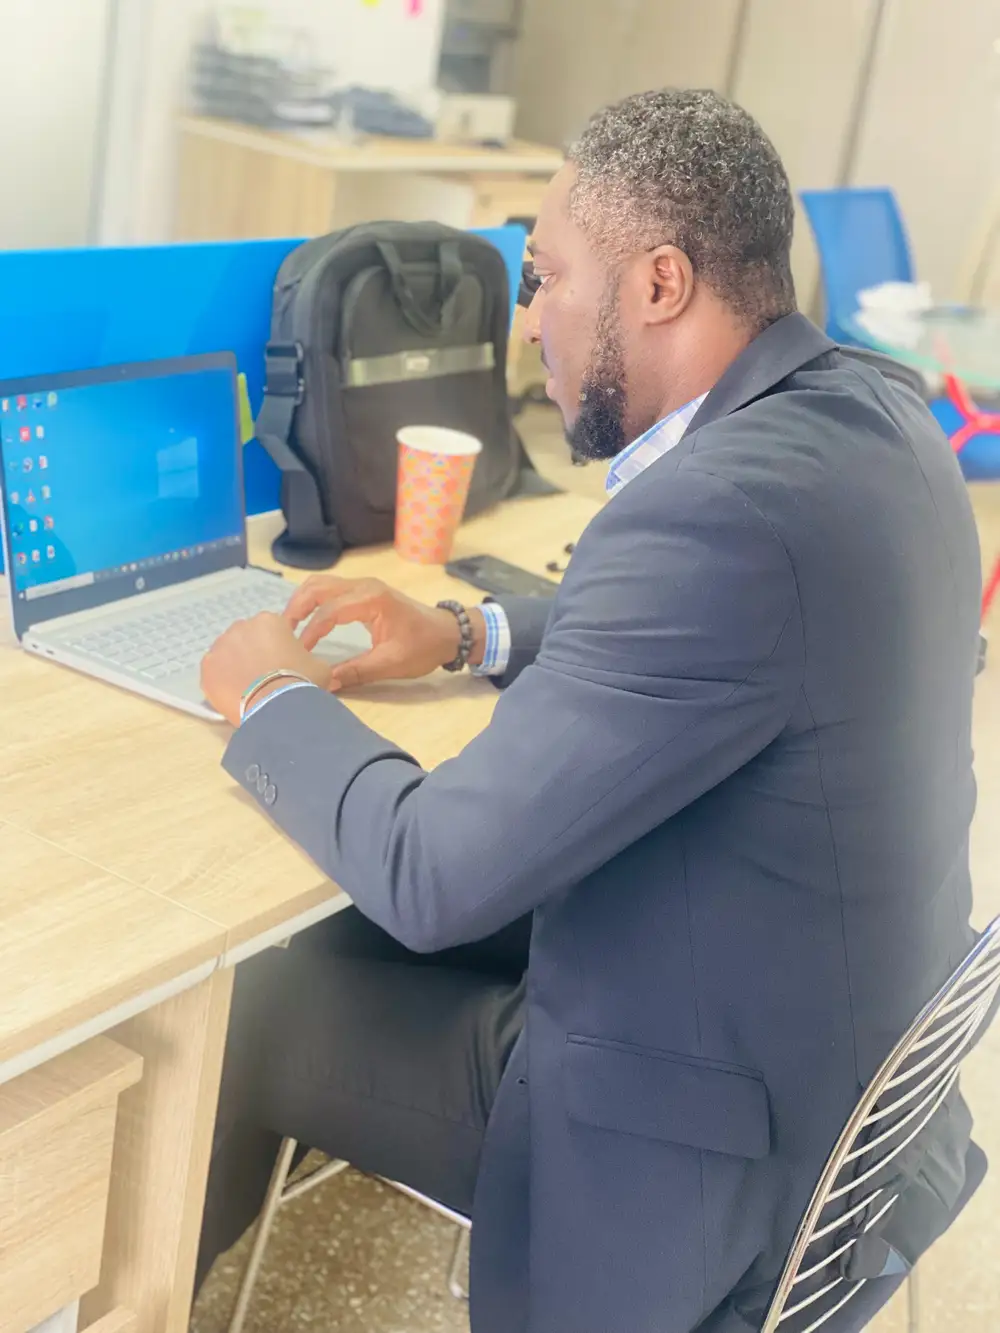 black man using hp laptop on an office table